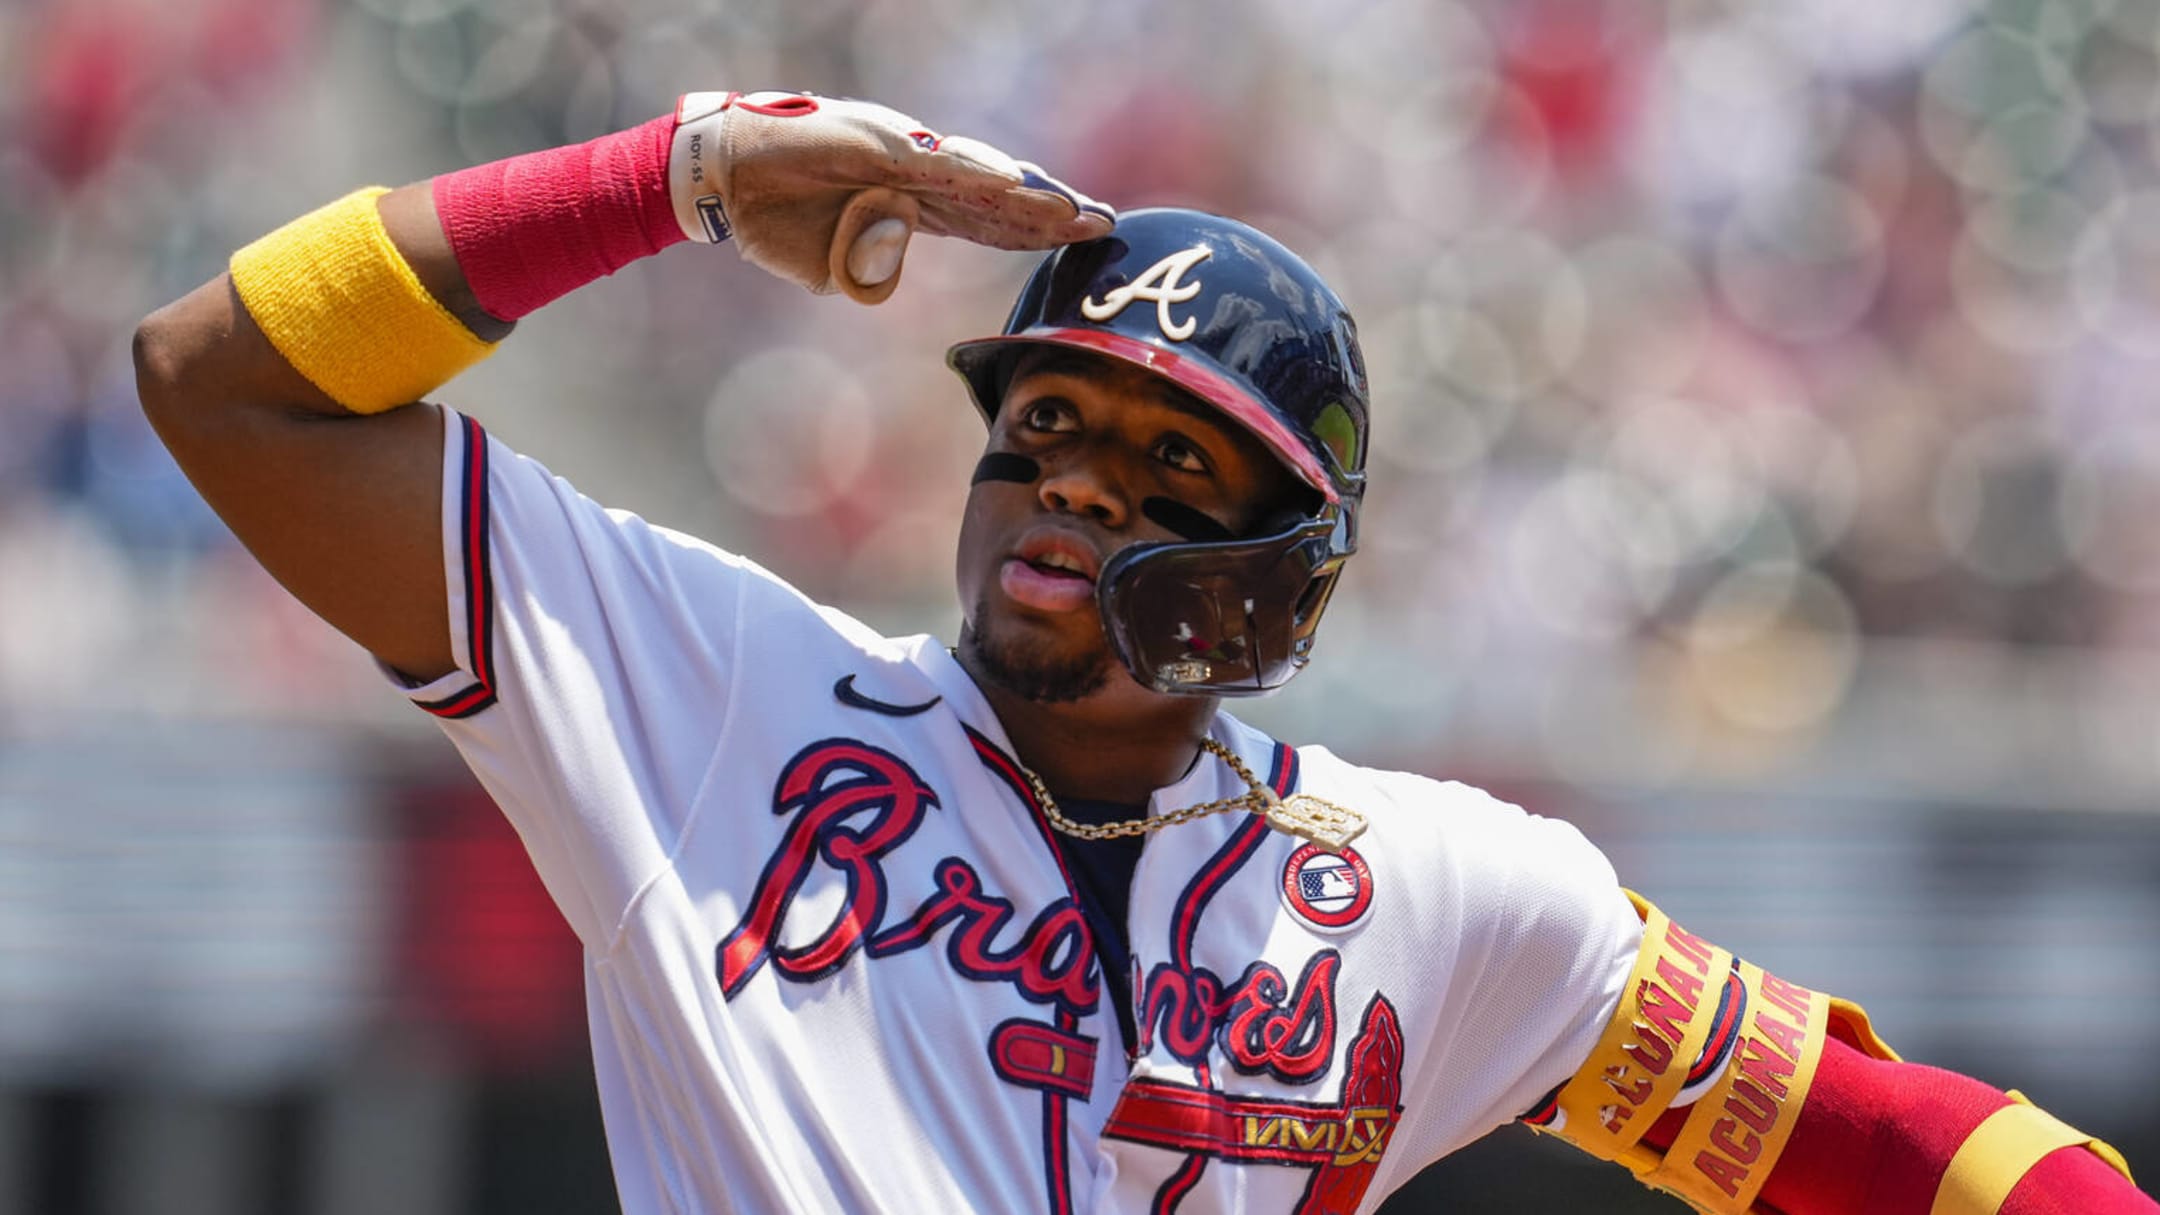 Ronald Acuña Jr. leads all major leaguers in All-Star votes